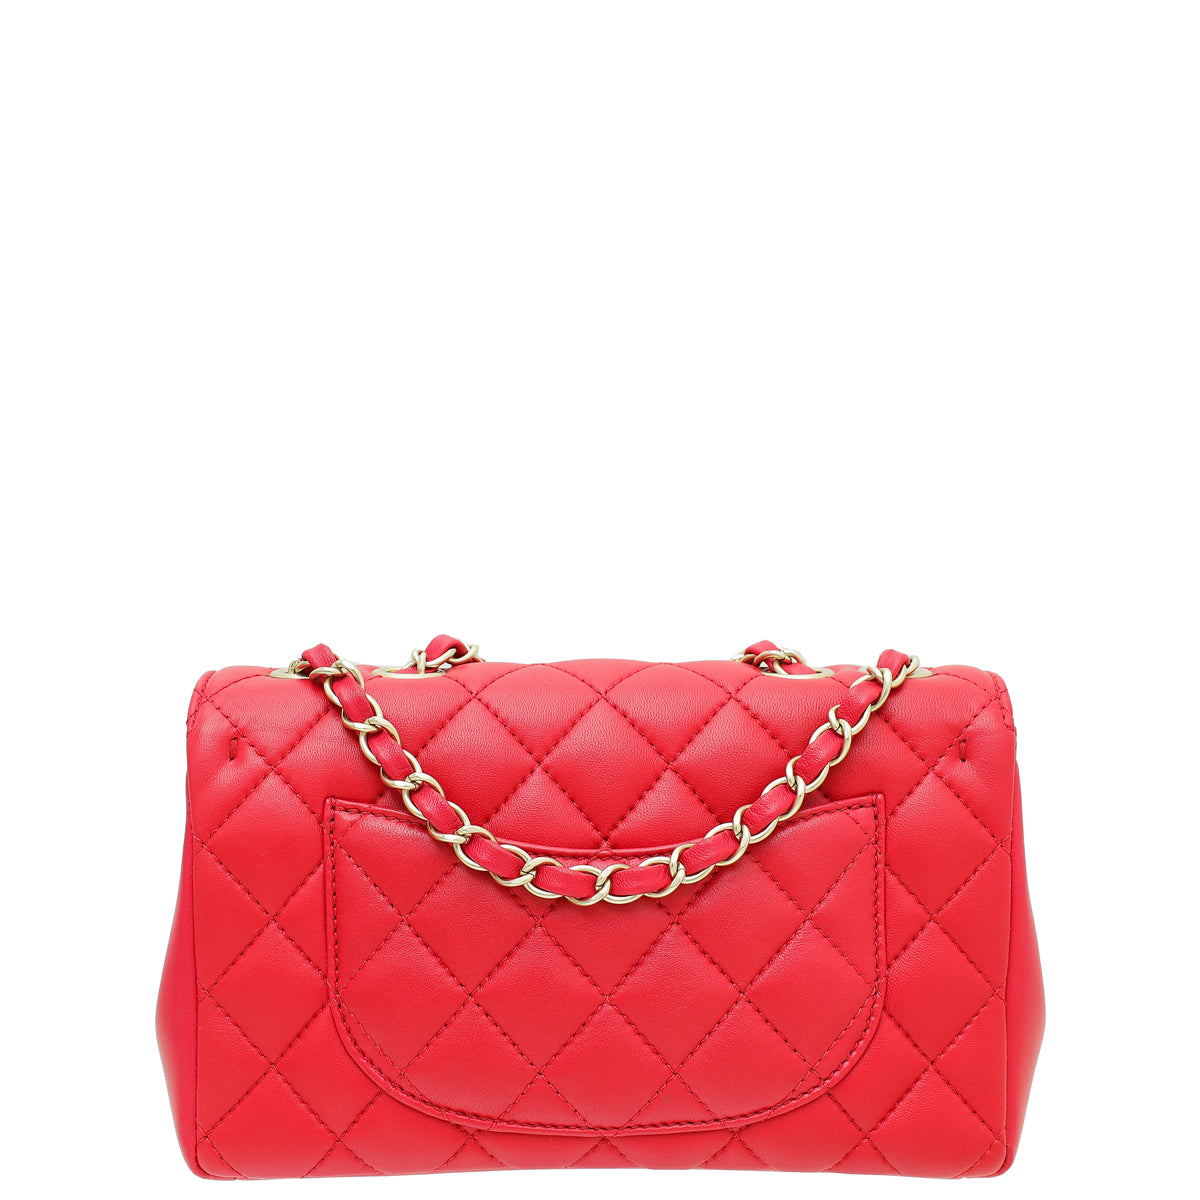 Load image into Gallery viewer, Chanel Bicolor Mini Mademoiselle Chic Flap Bag
